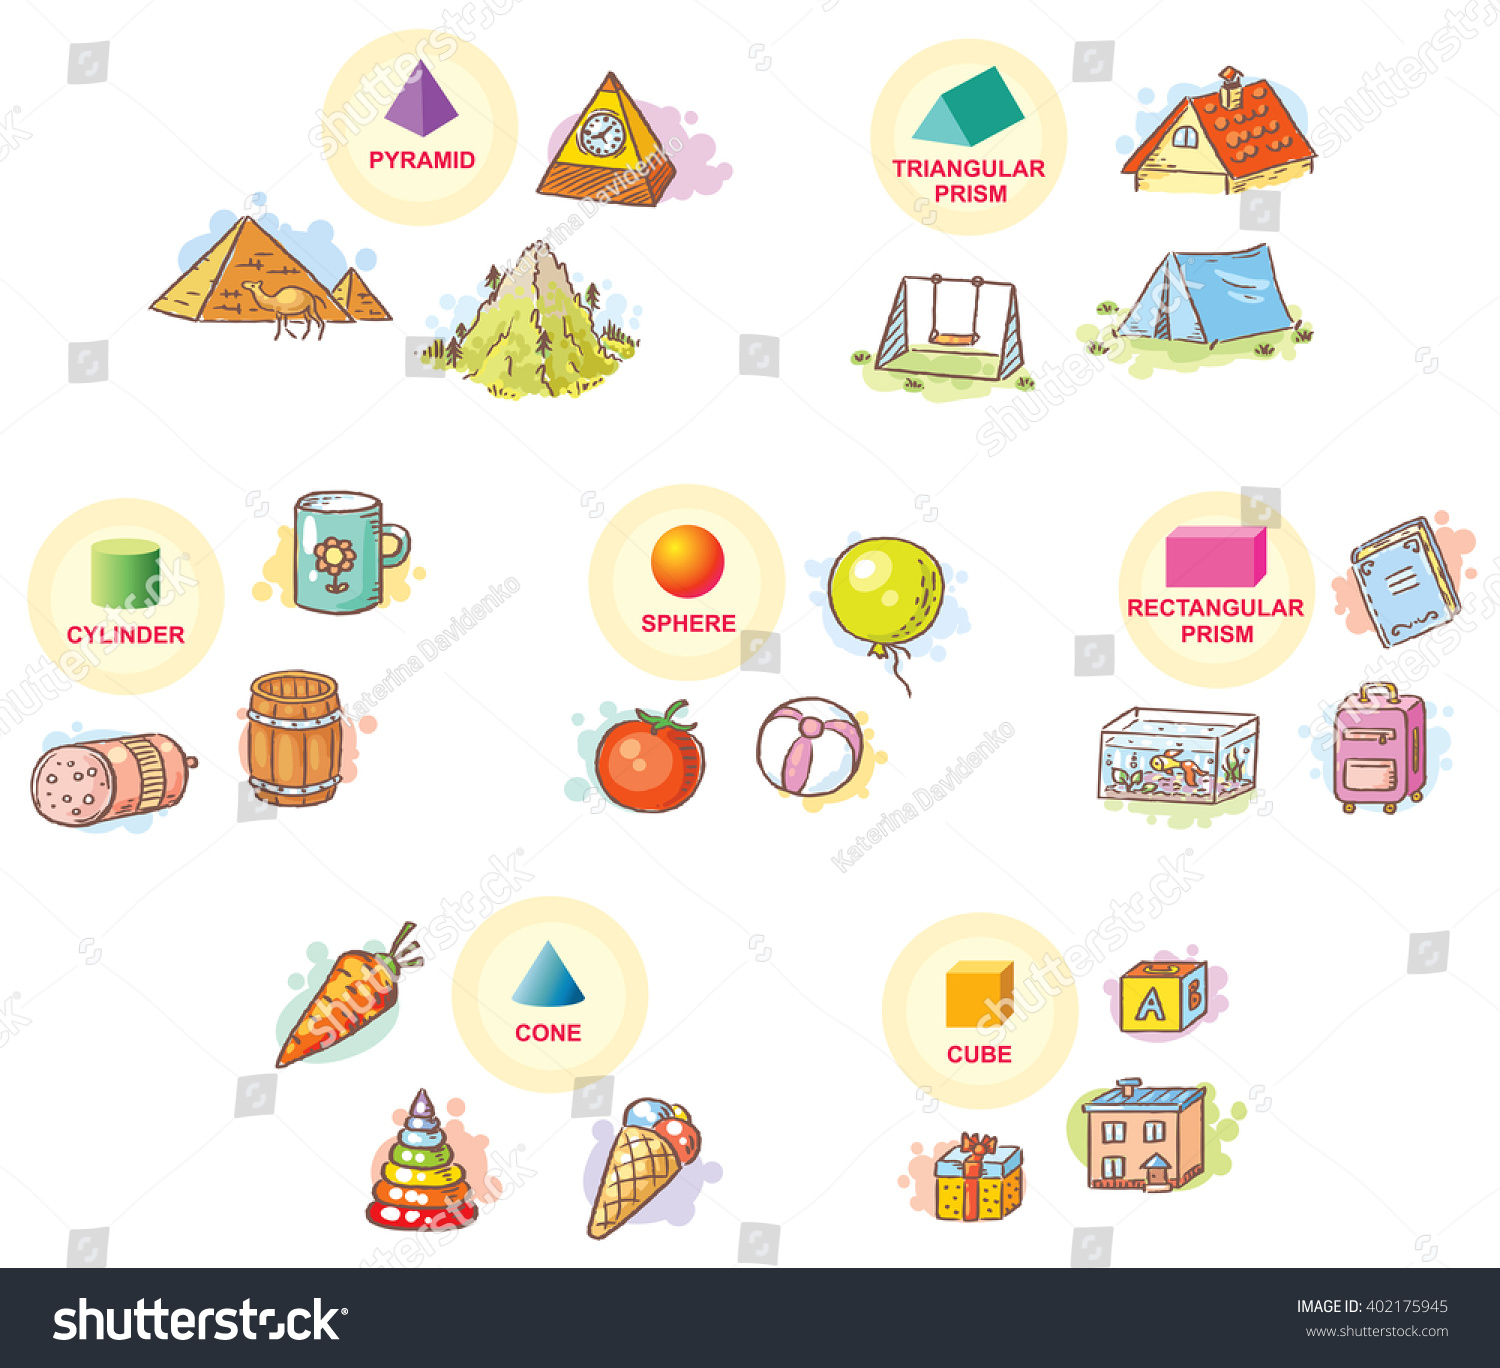 3d Shapes Example Objects Everyday Life Stock Vector Royalty Free 402175945